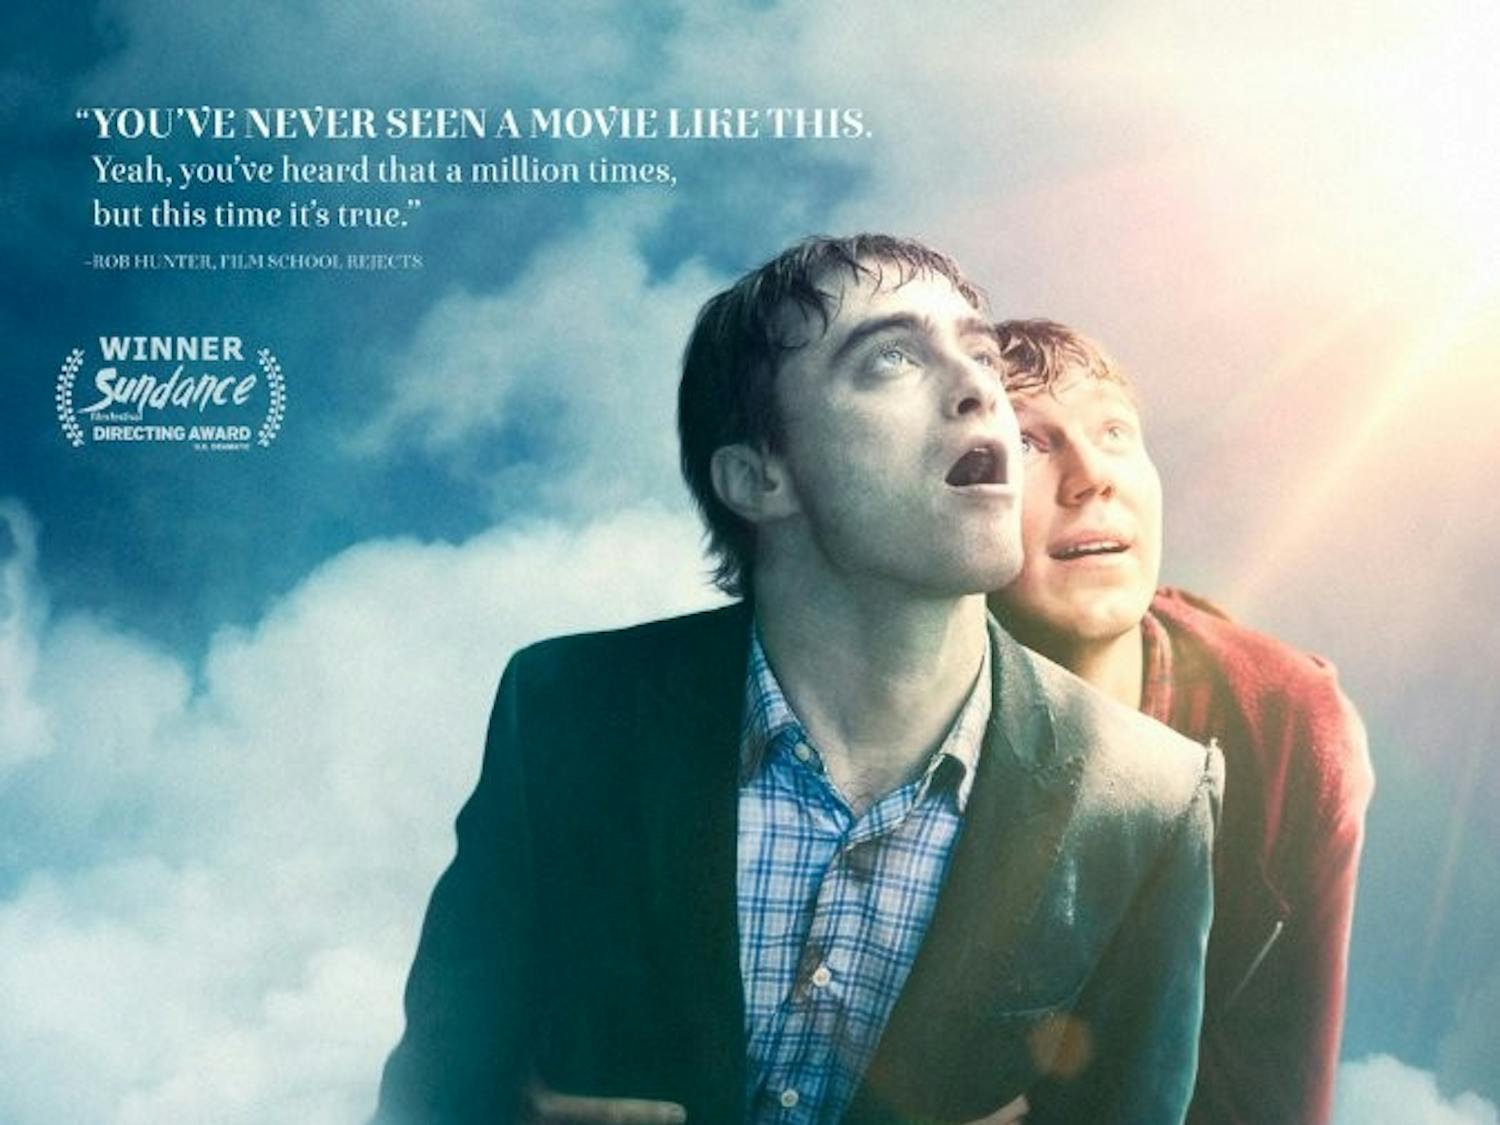 For a movie that's premise is based on a farting corpse, "Swiss Army Man" is a very smart film, although it may not be for everyone.